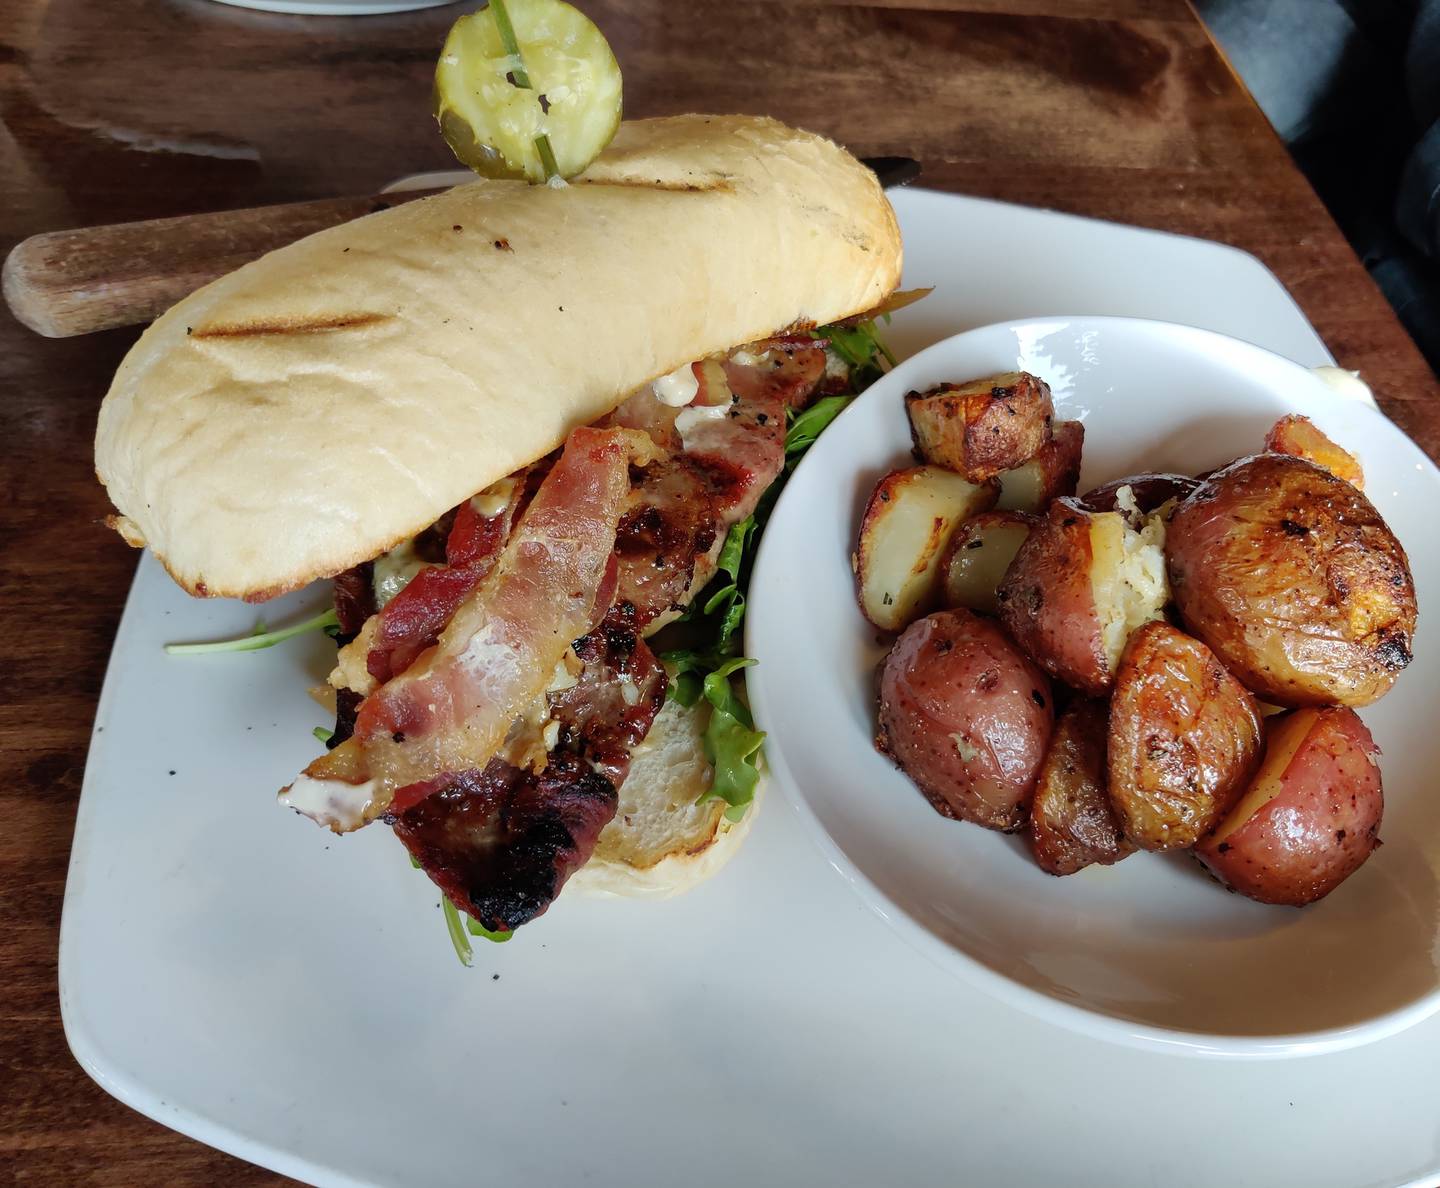 Steak sandwich, with bacon added, at The Office in St. Charles.